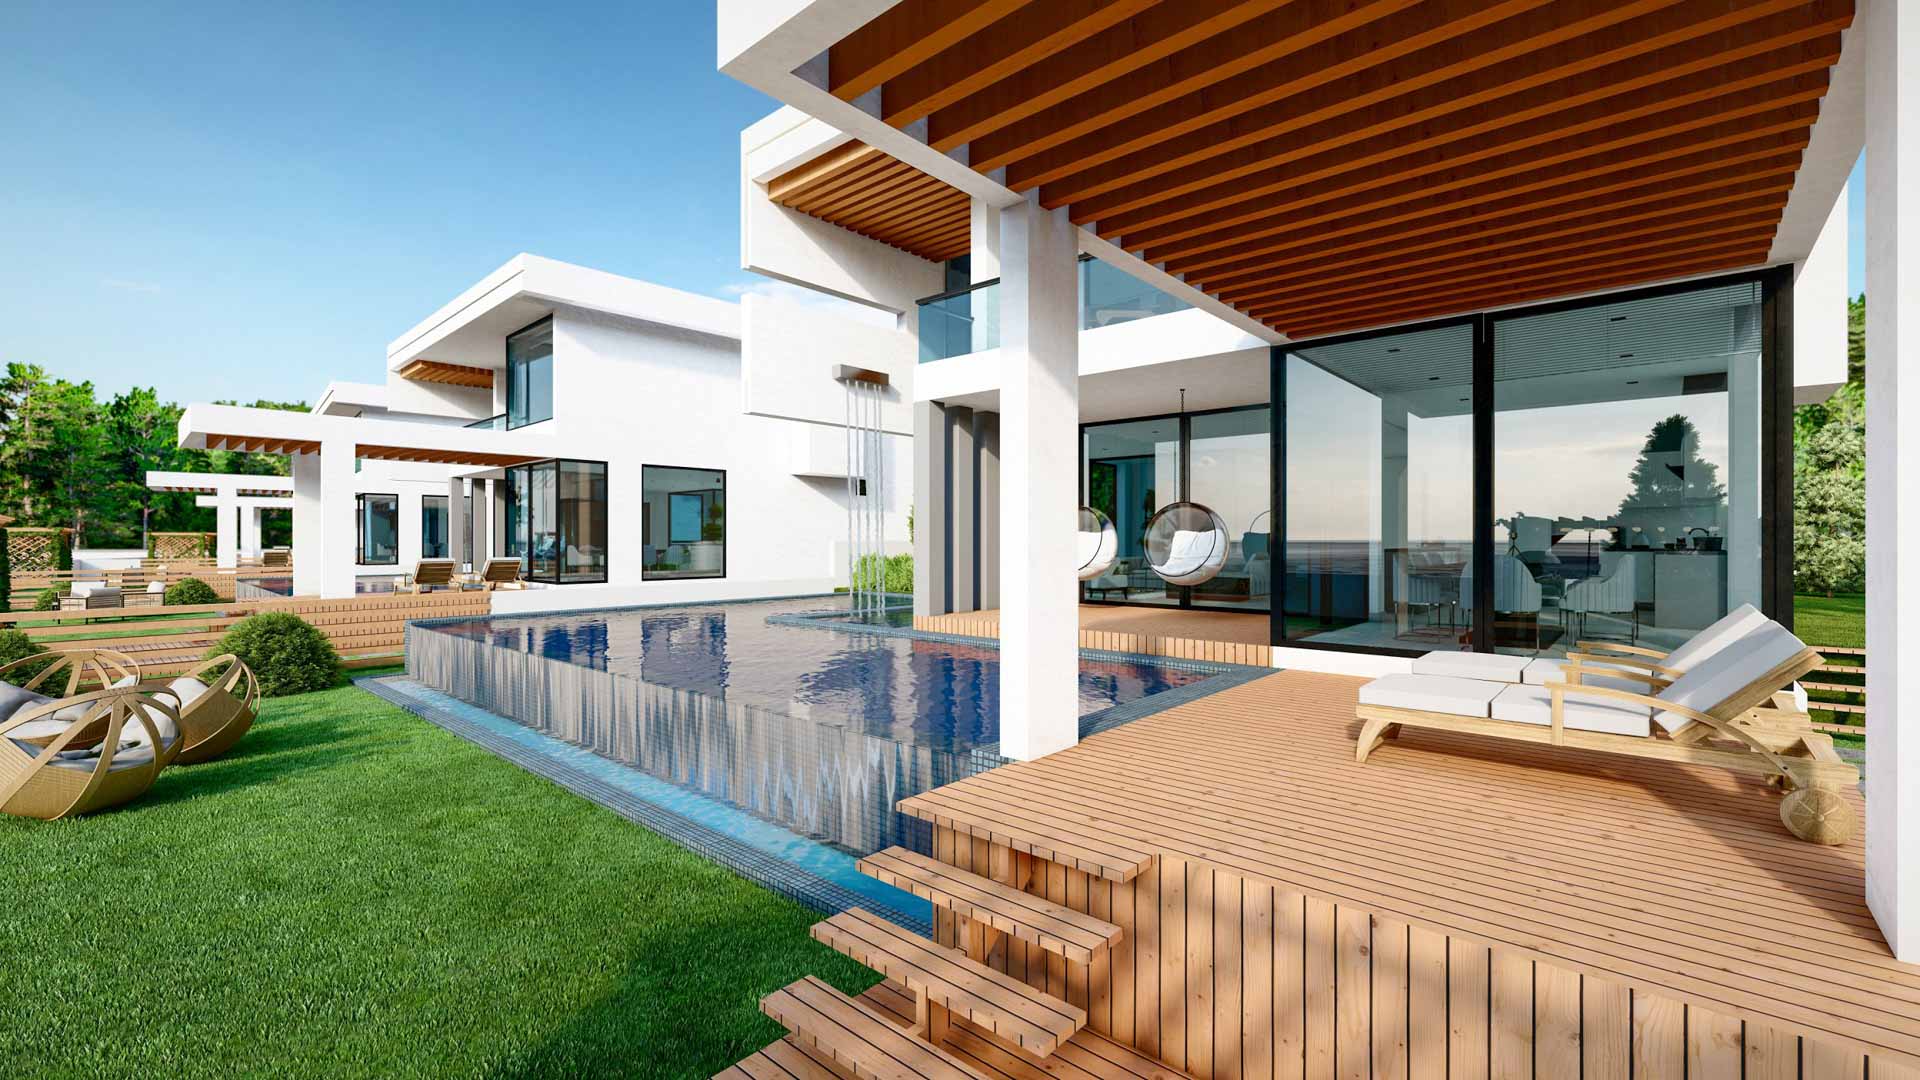 id983-two-storey-41-villas-with-a-garden-and-a-swimming-pool-in-demirtas-area (16)